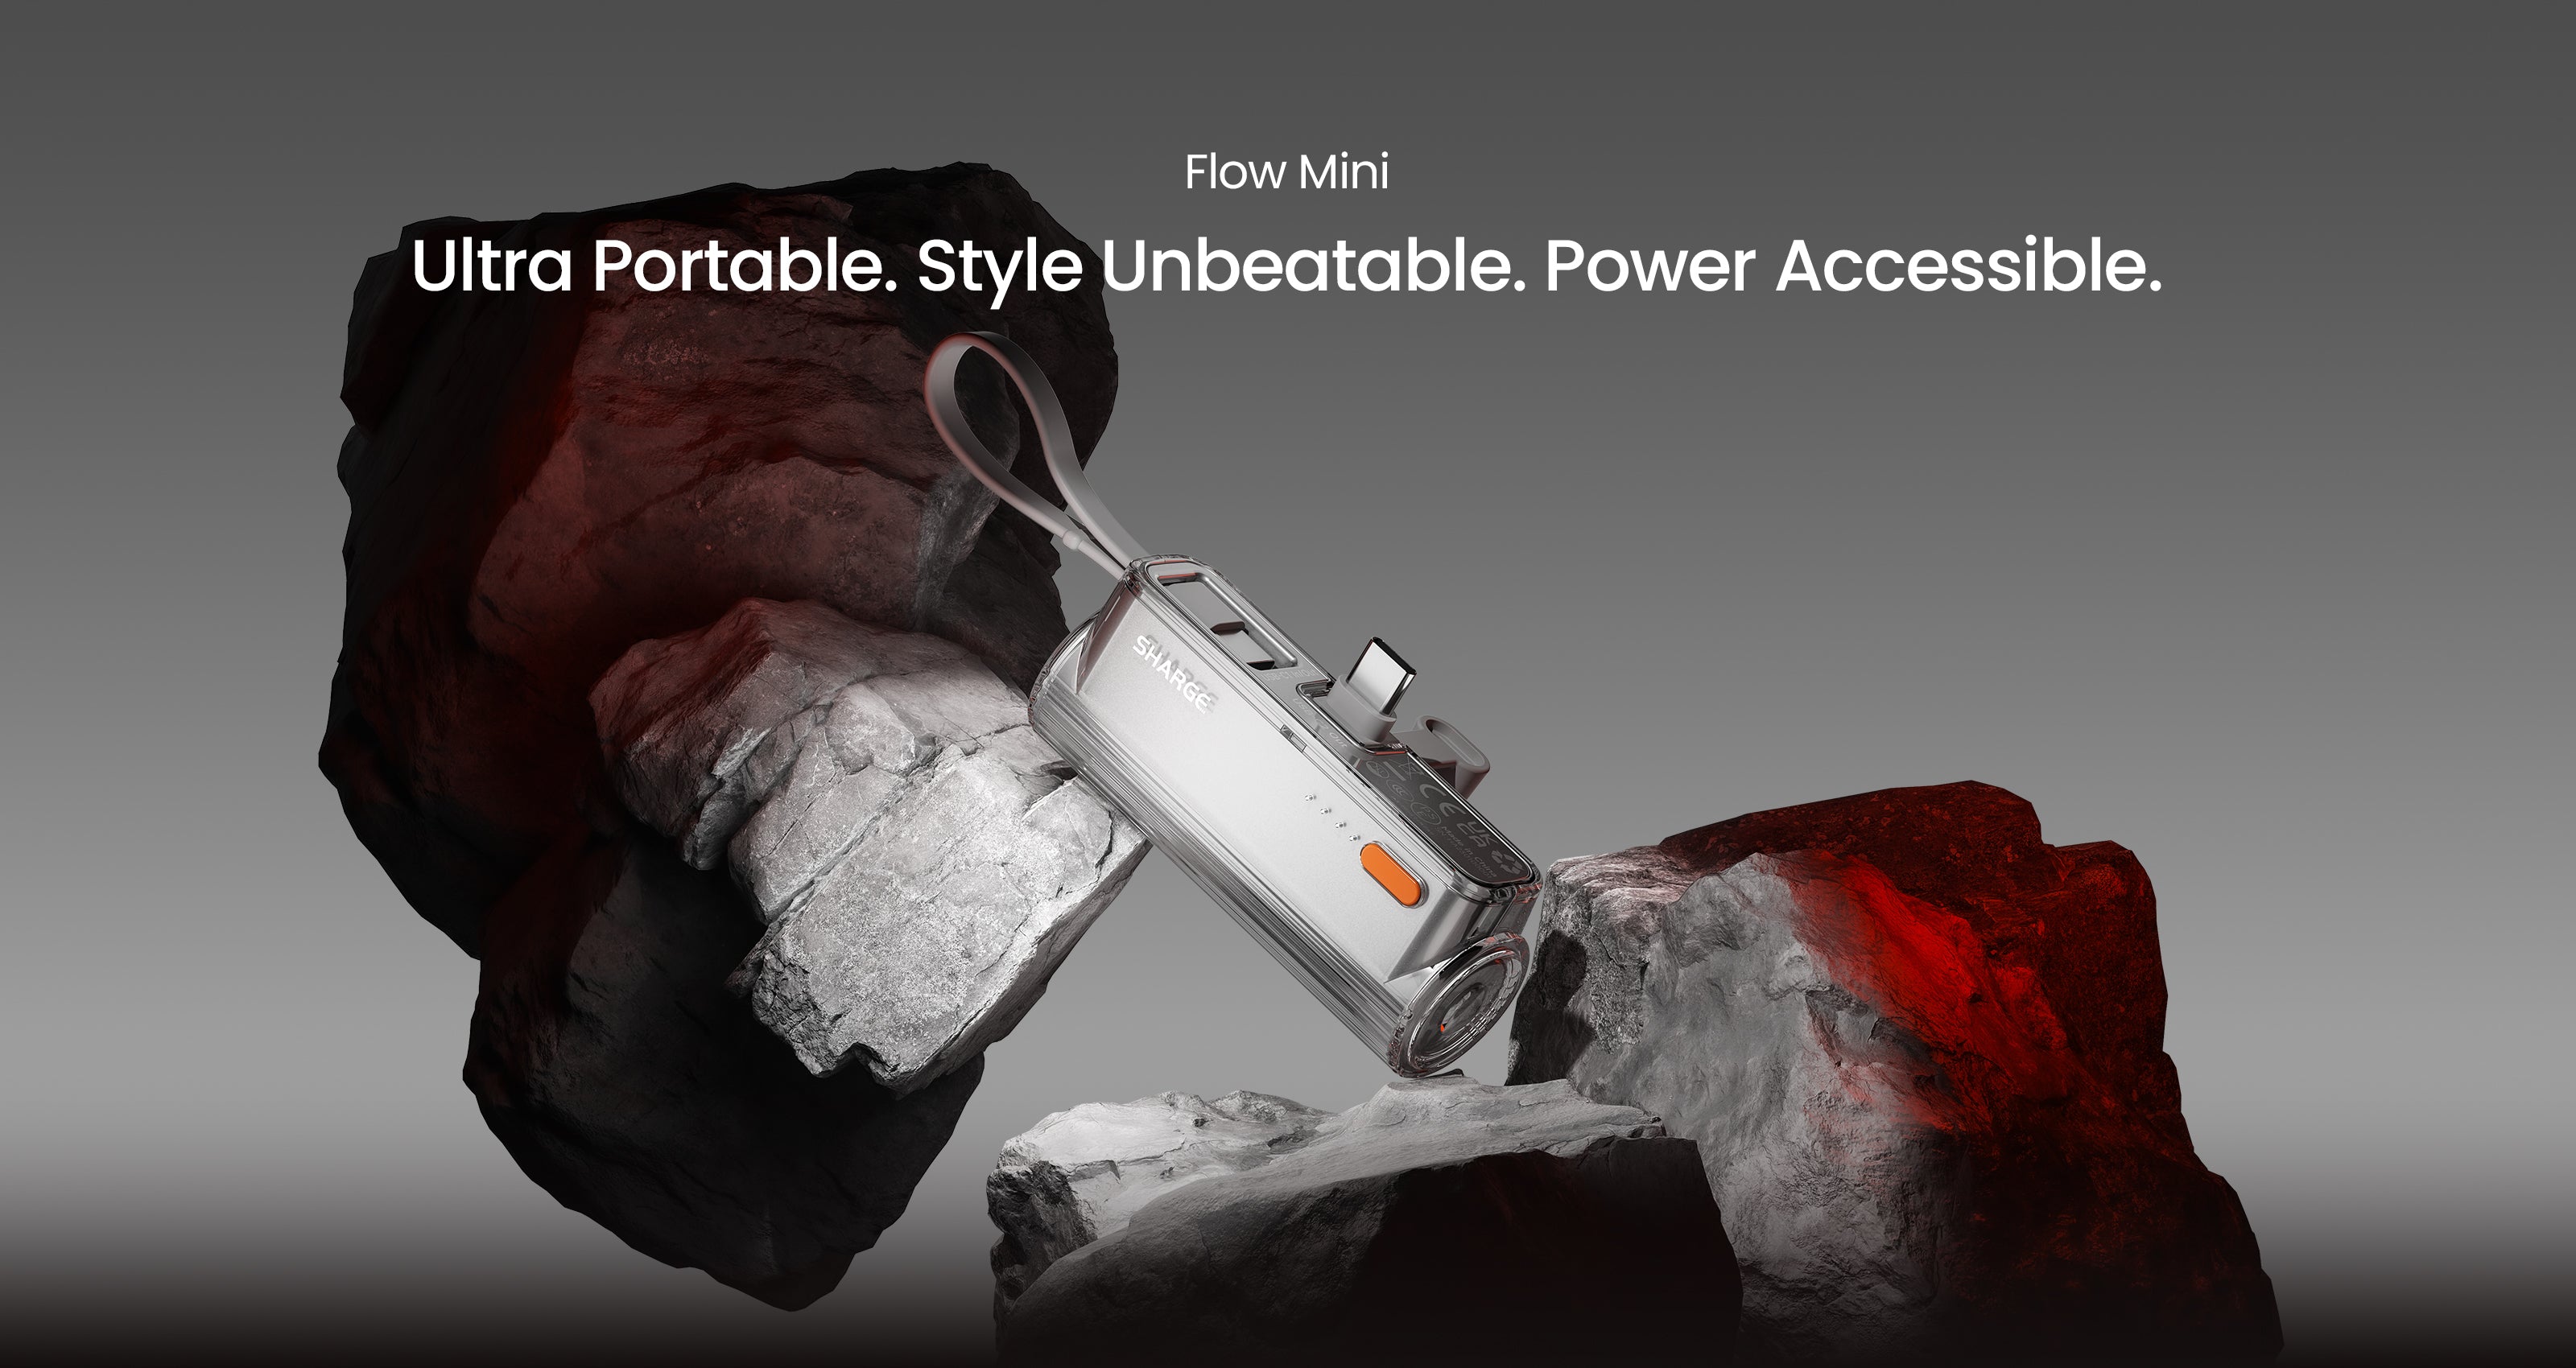 Sharge - Ultra Portable. Style Unbeatable. Power Accessible. Meet Flow  Mini, the chicest mini power bank with unique interchangeable connecter  design. Available now with 25% OFF holiday offer. Grab yours:   #sharge #